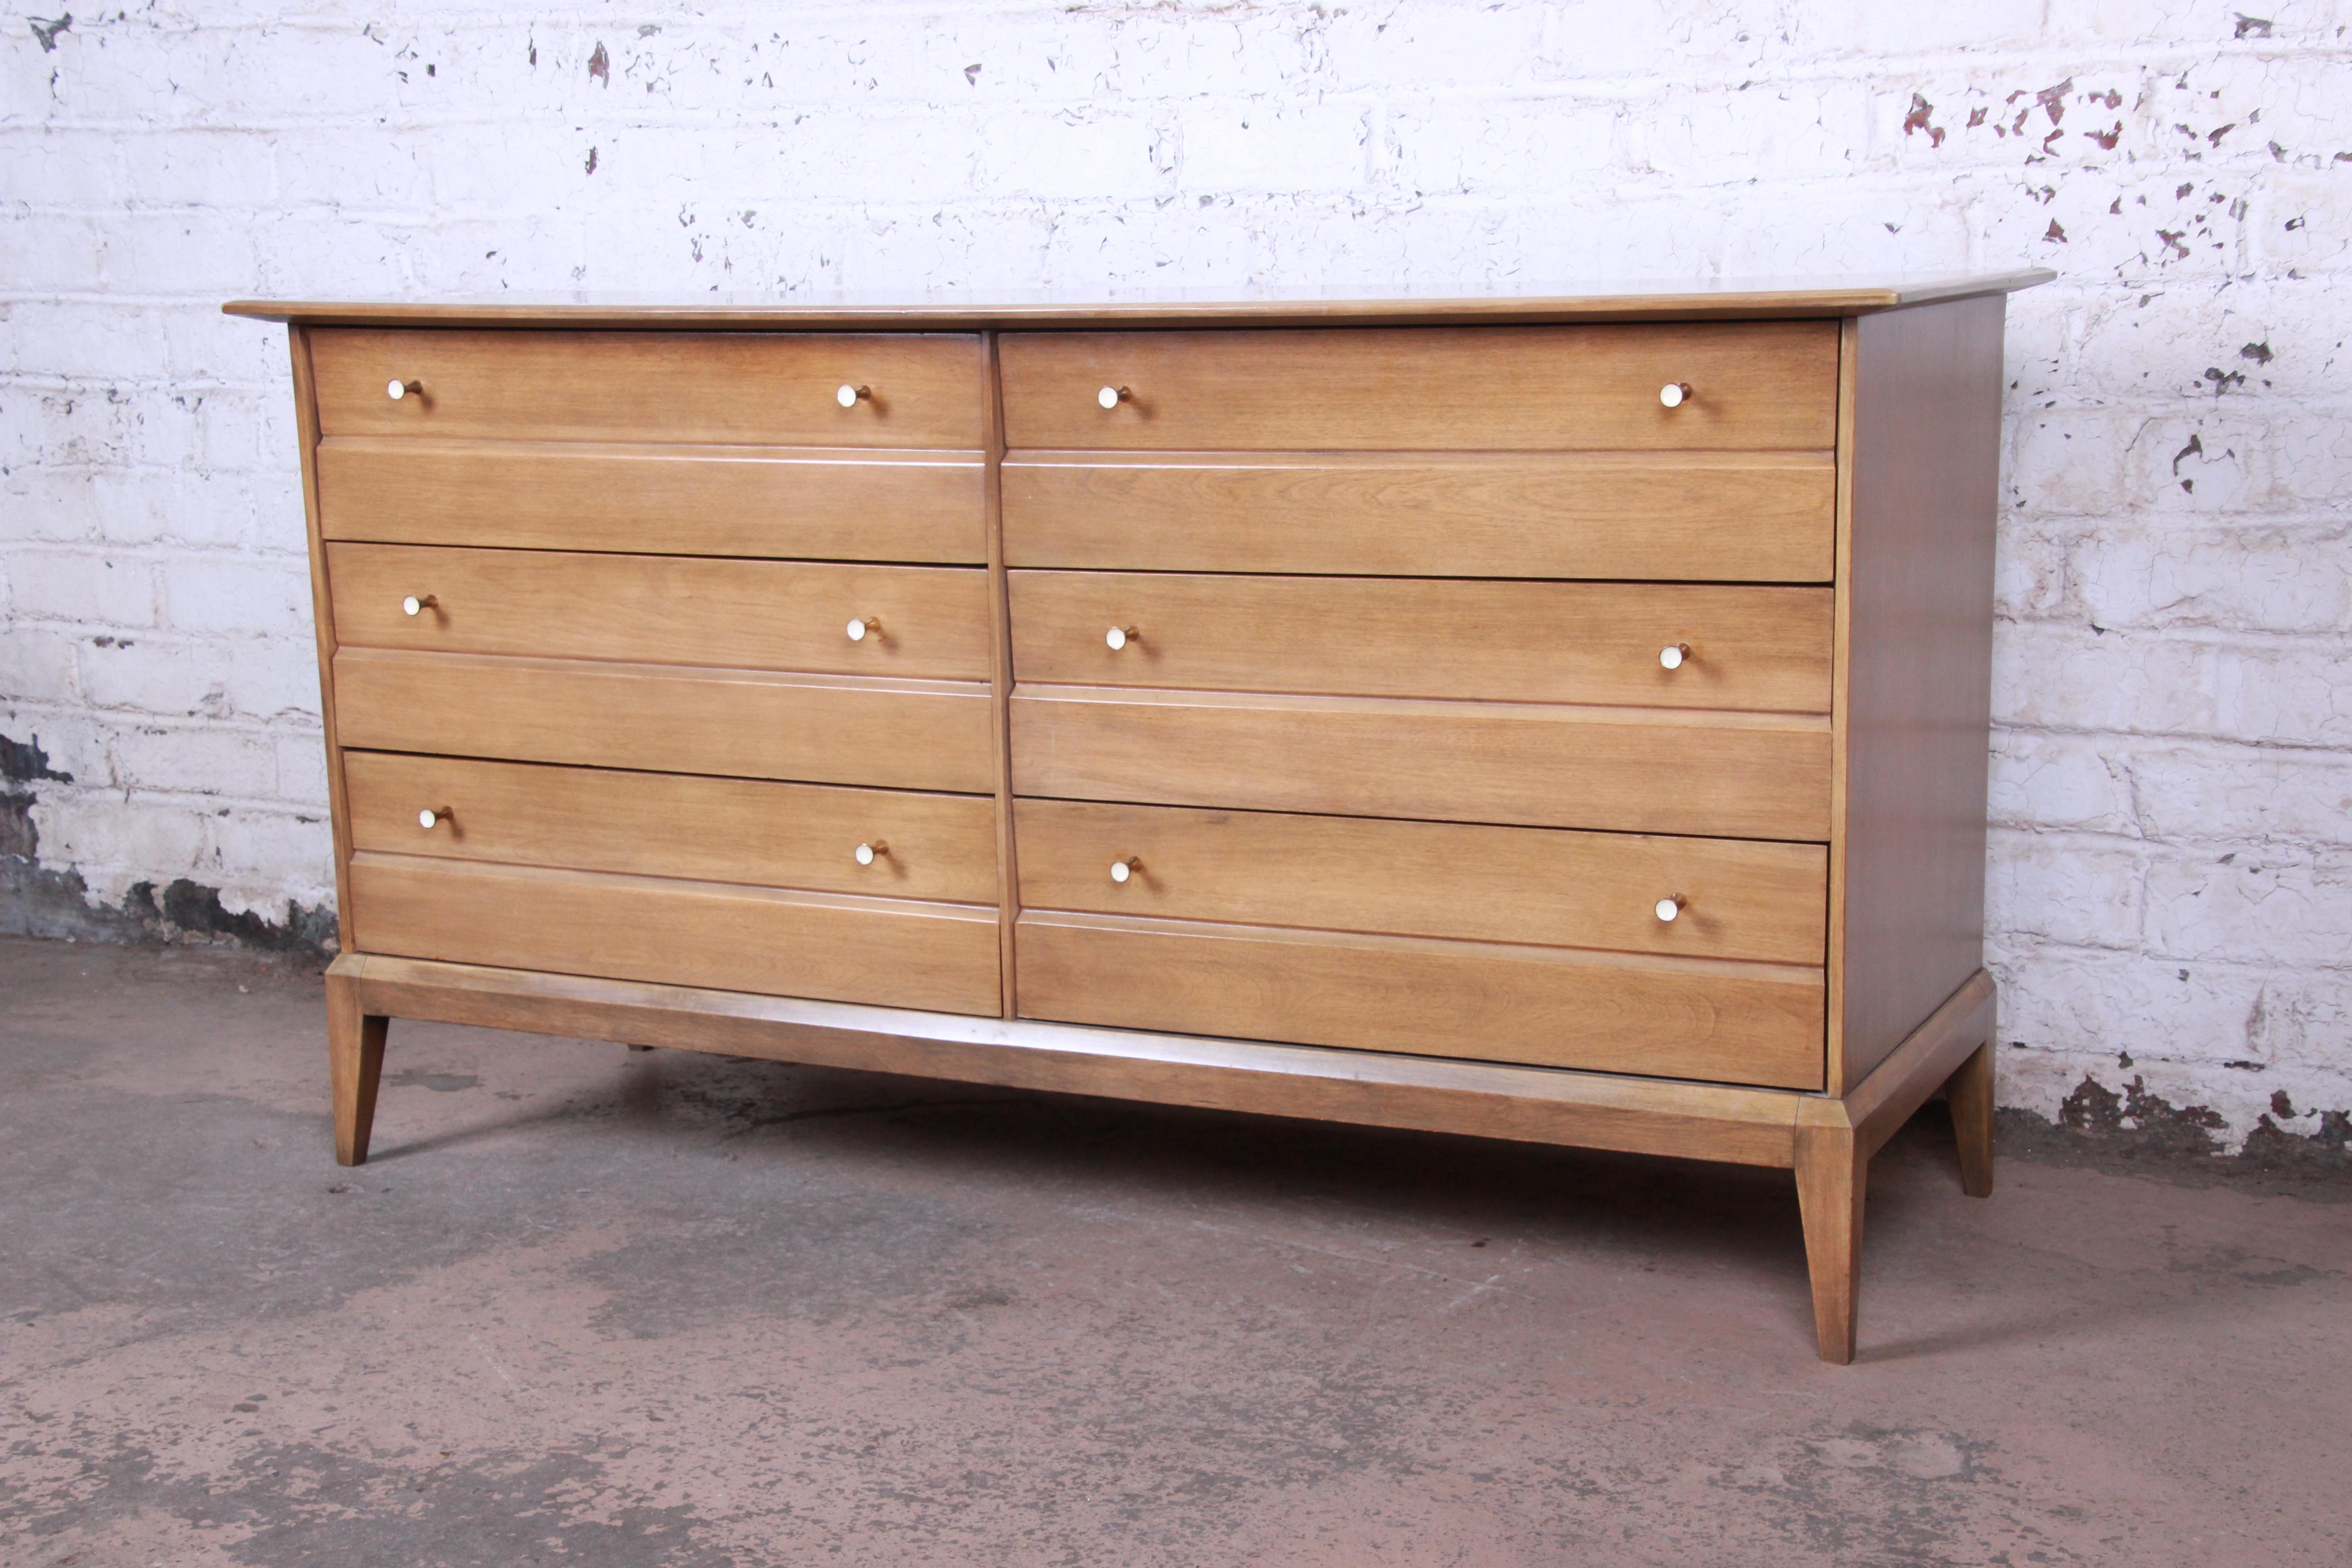 Offering a very nice intage six-drawer Mid-Century Modern dresser with mirror from the Cadence line by Heywood Wakefield. The dresser features clean, sleek Mid-Century design and solid maple construction in the 